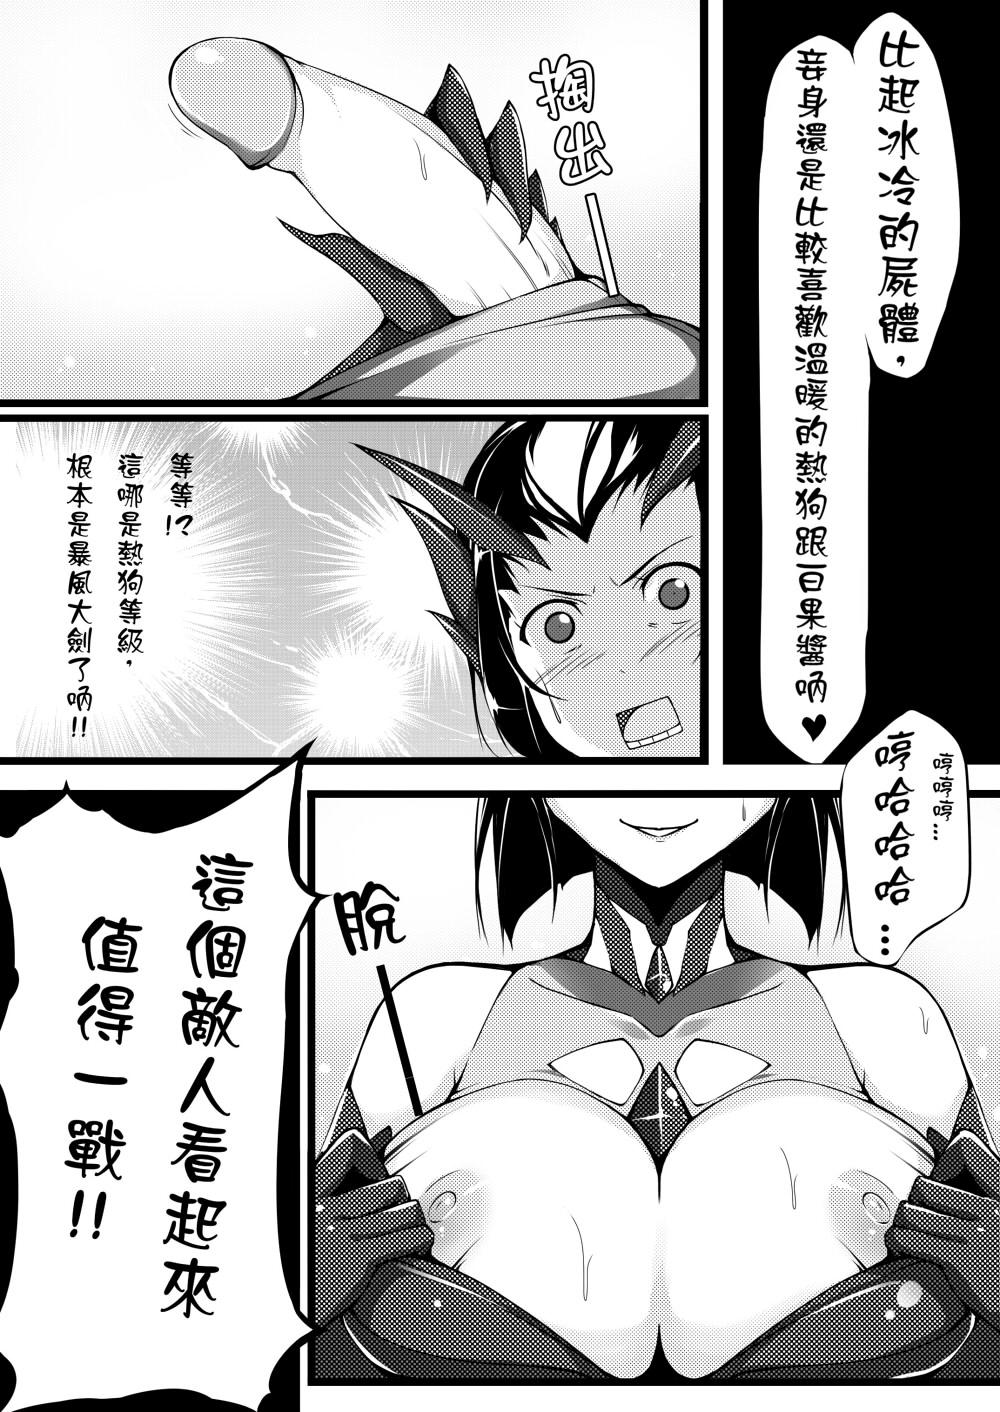 Love Making 蜘蛛王女-Darkness - League of legends Cumming - Page 4